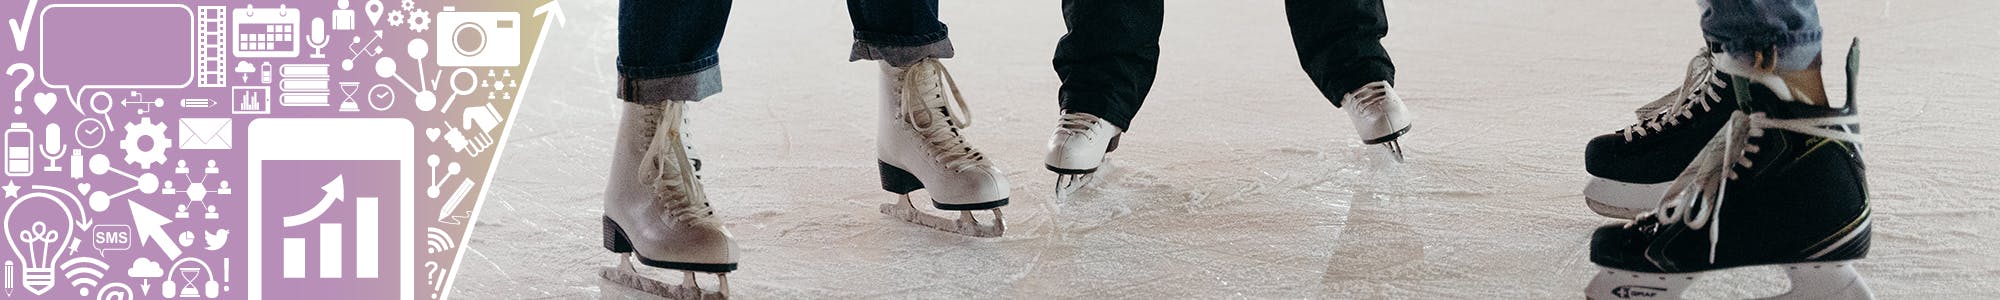 The feet of three people in skates, two in figure skates and one in hockey skates beside engagement icons